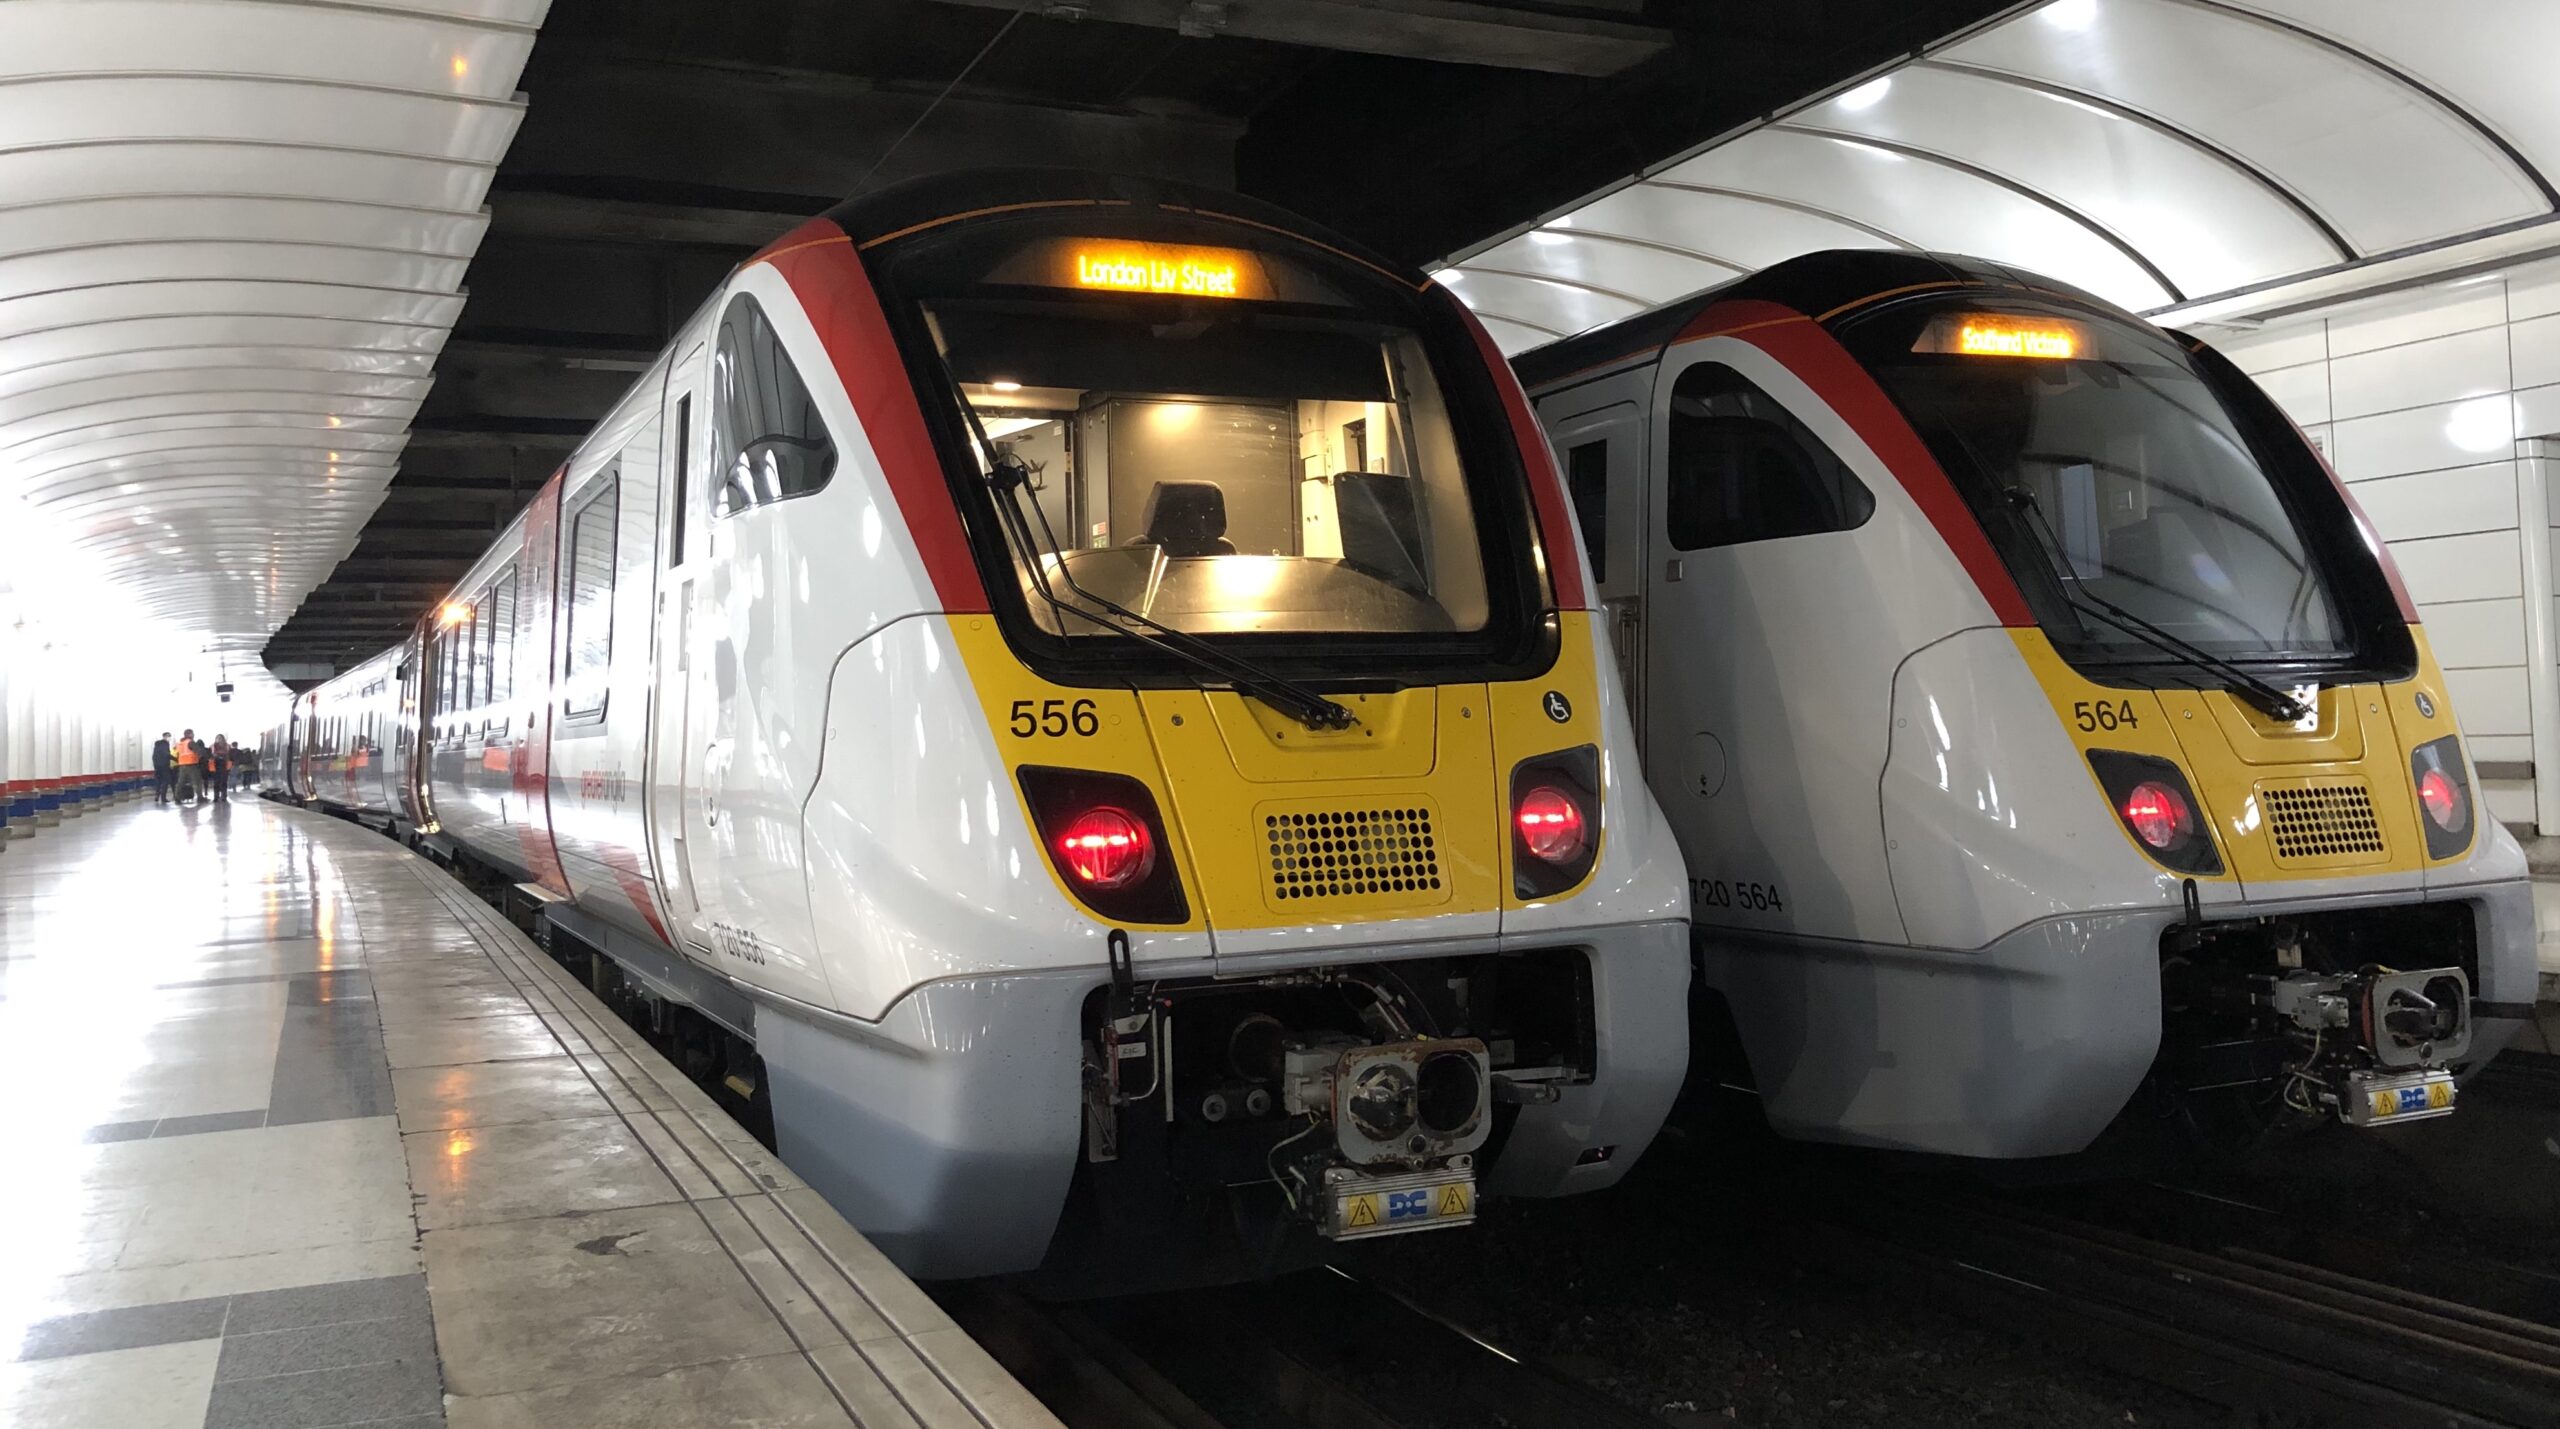 Two Greater Anglia trains positioned side by side pulled into a train station with platforms either side.